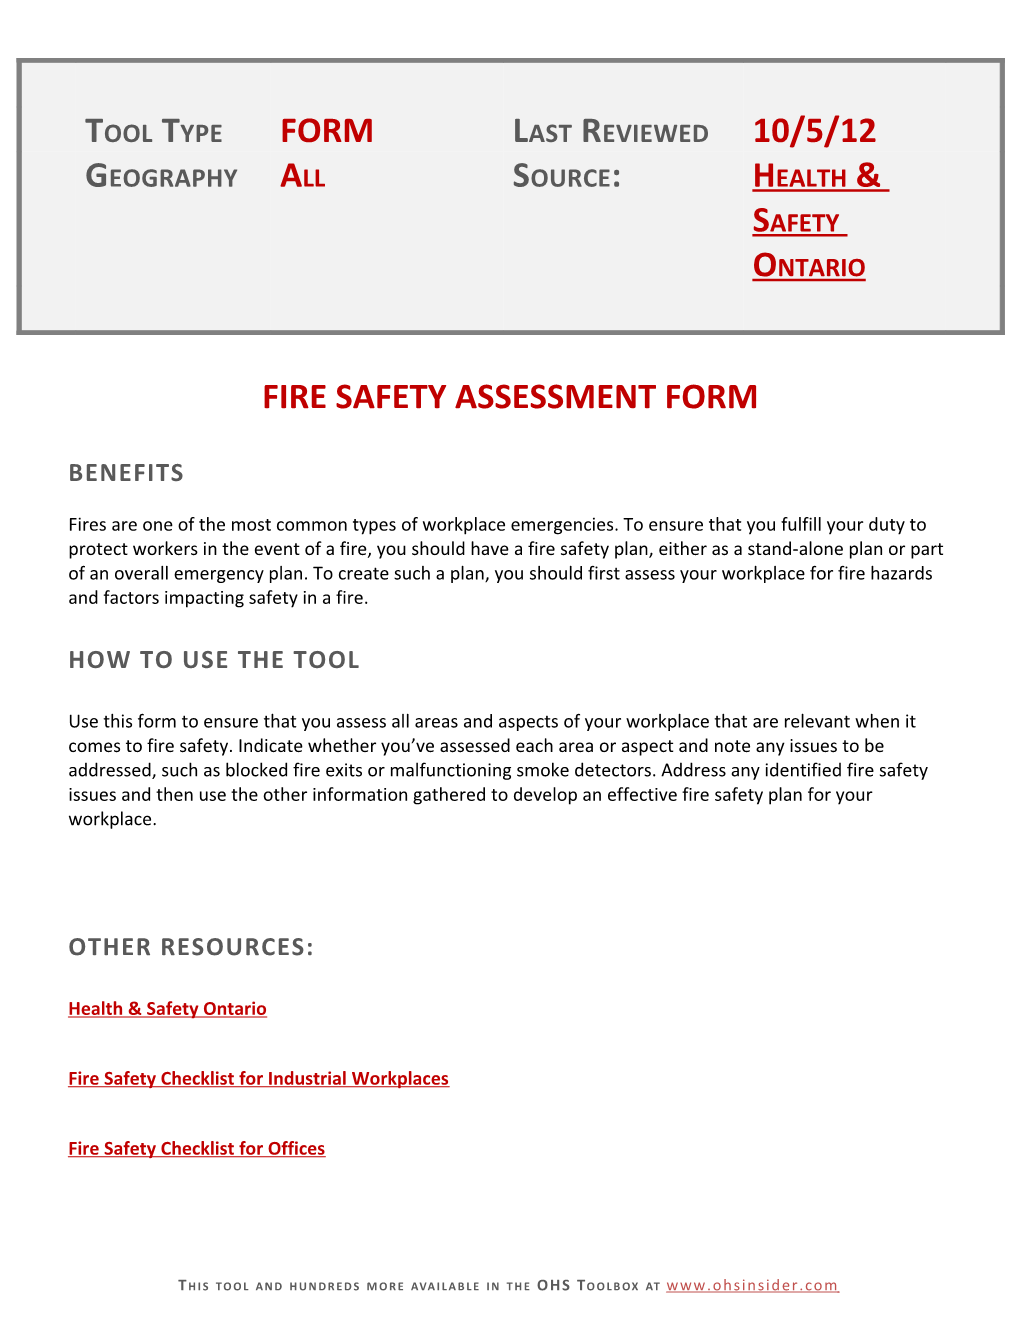 Fire Safety Assessment Form